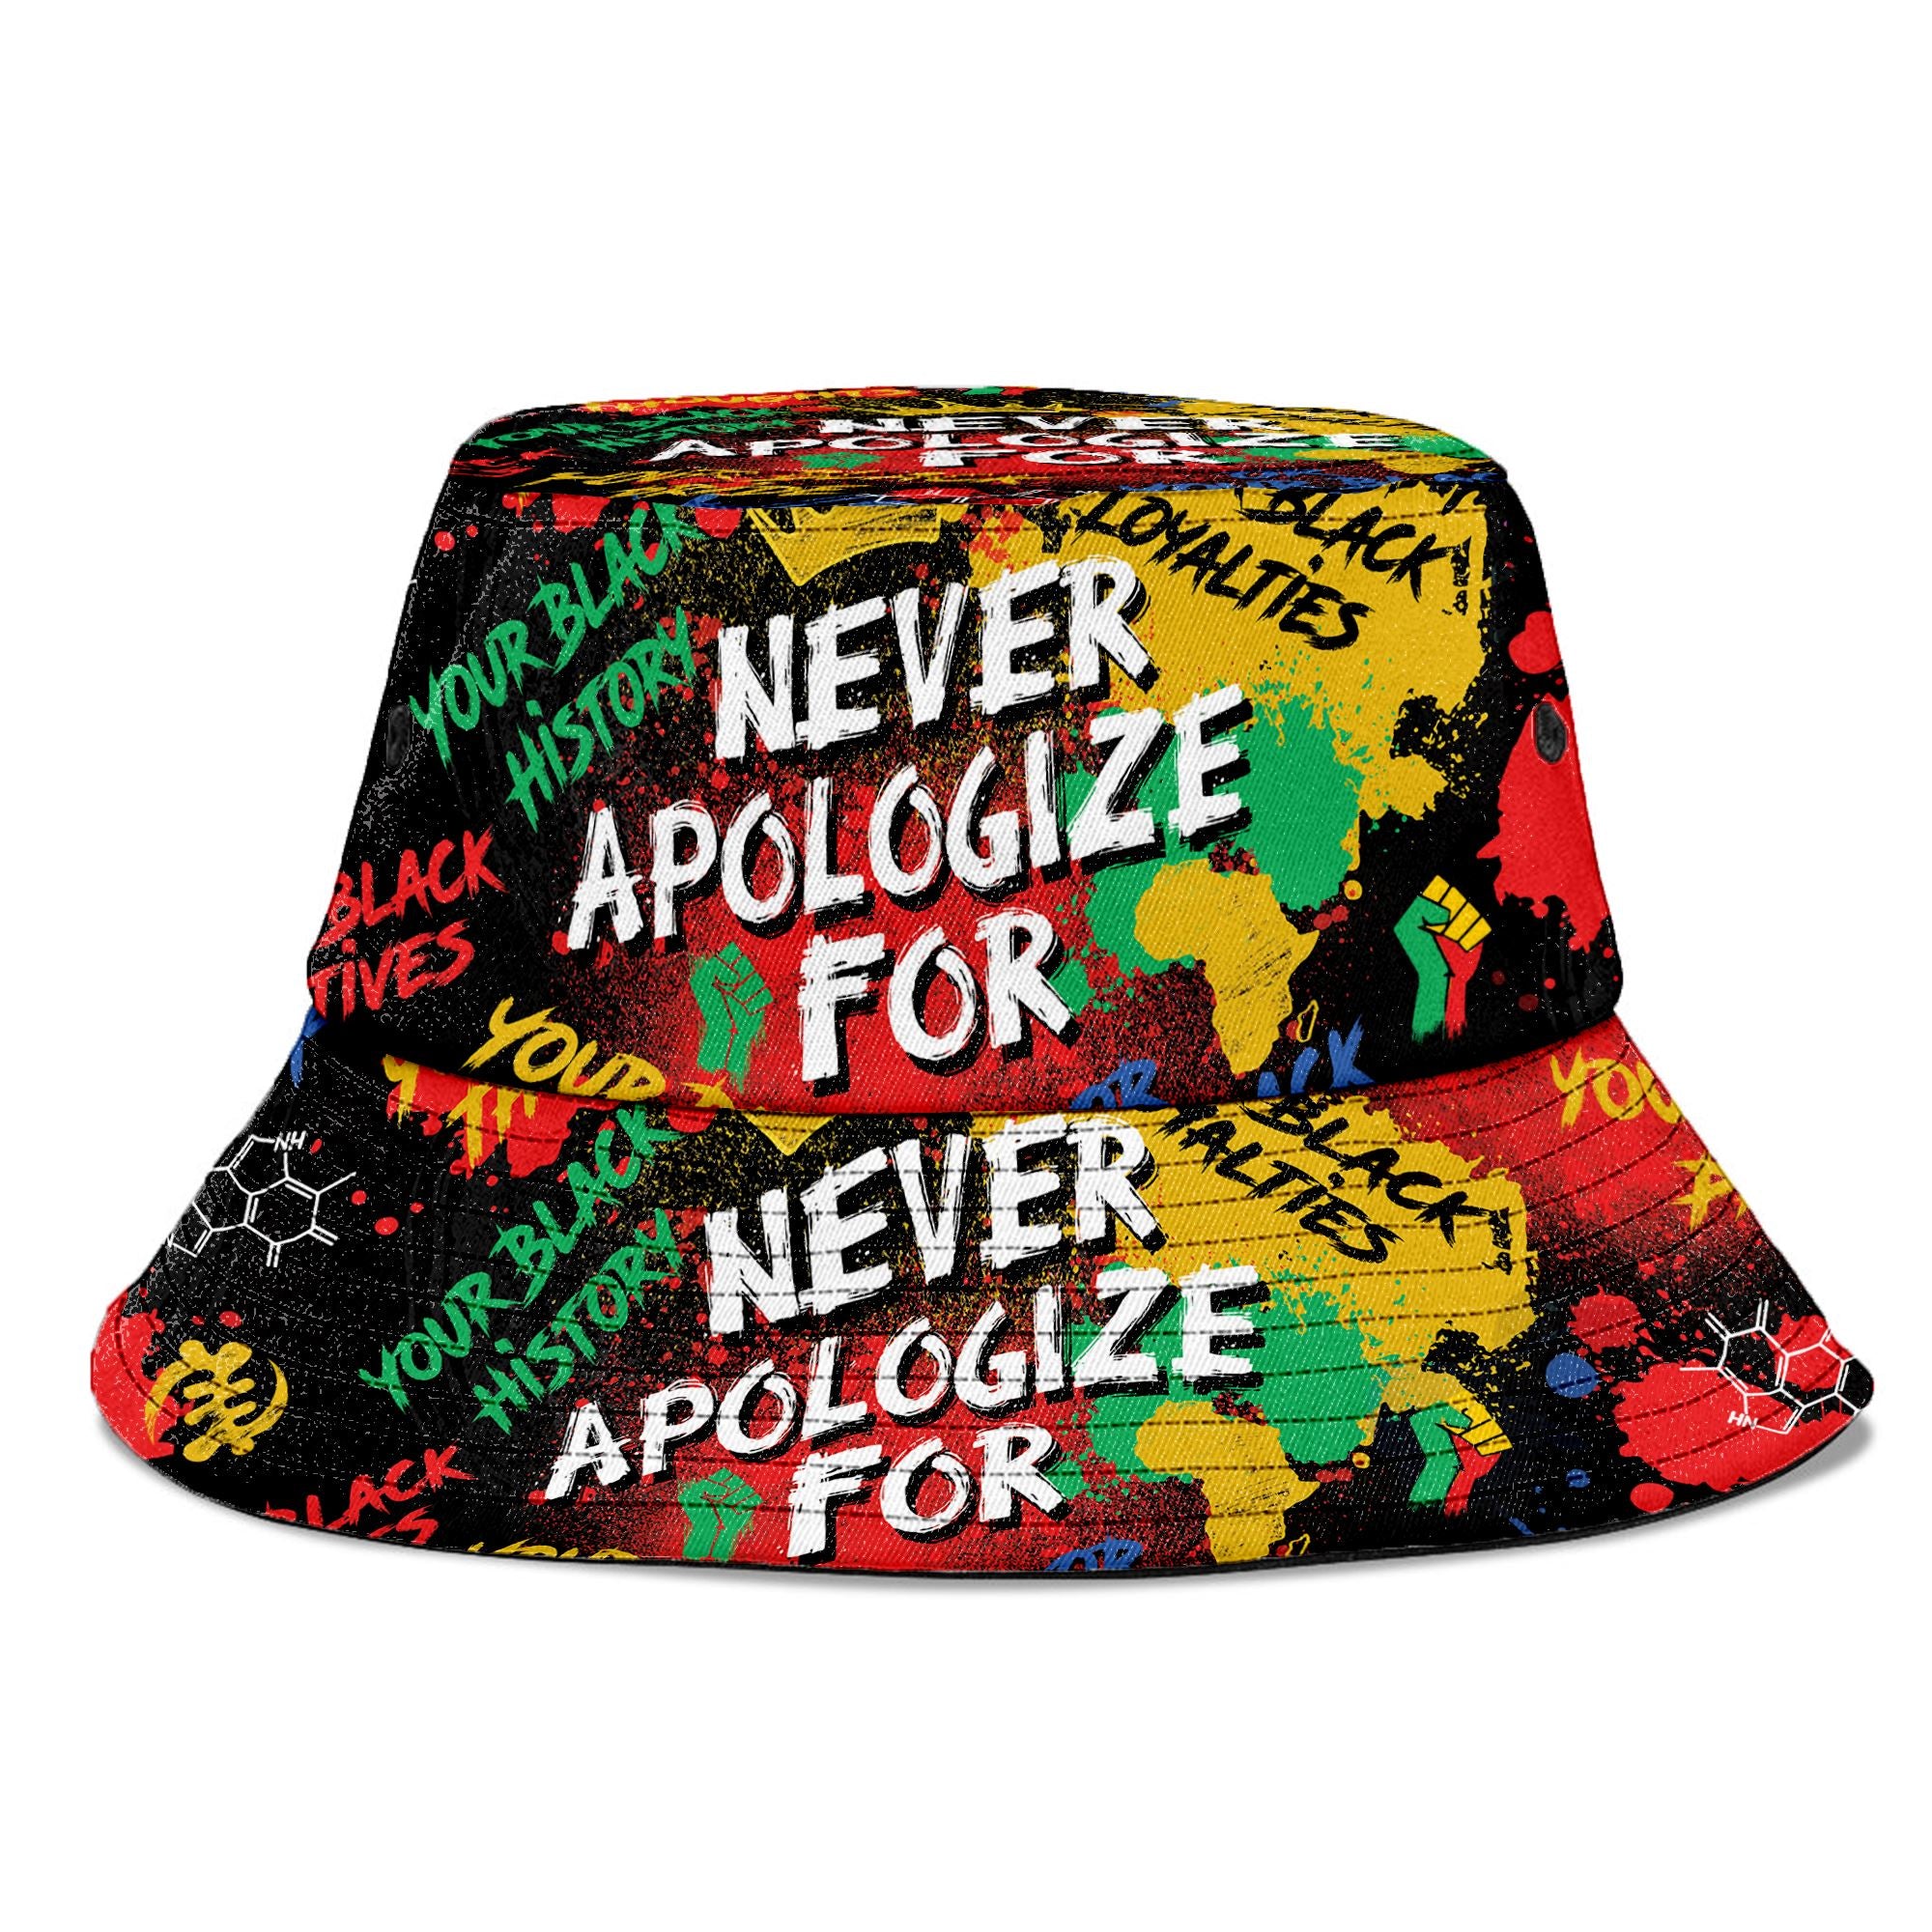 Never Apologize For Being Black Bucket Hat Bucket Hat Tianci 